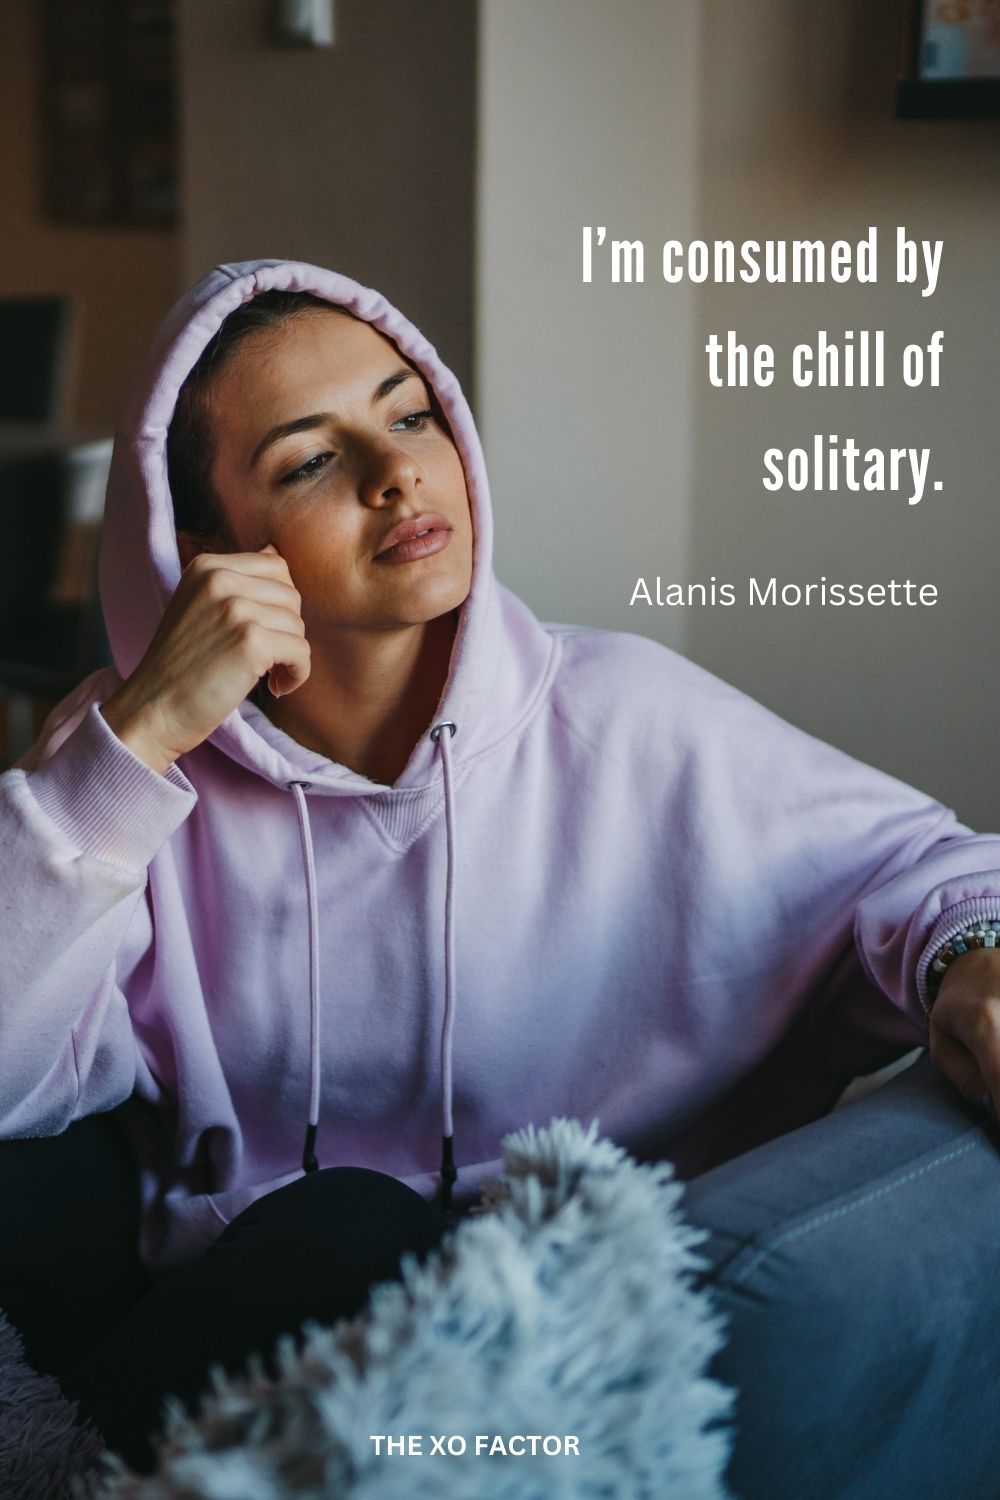 I’m consumed by the chill of solitary.
Alanis Morissette